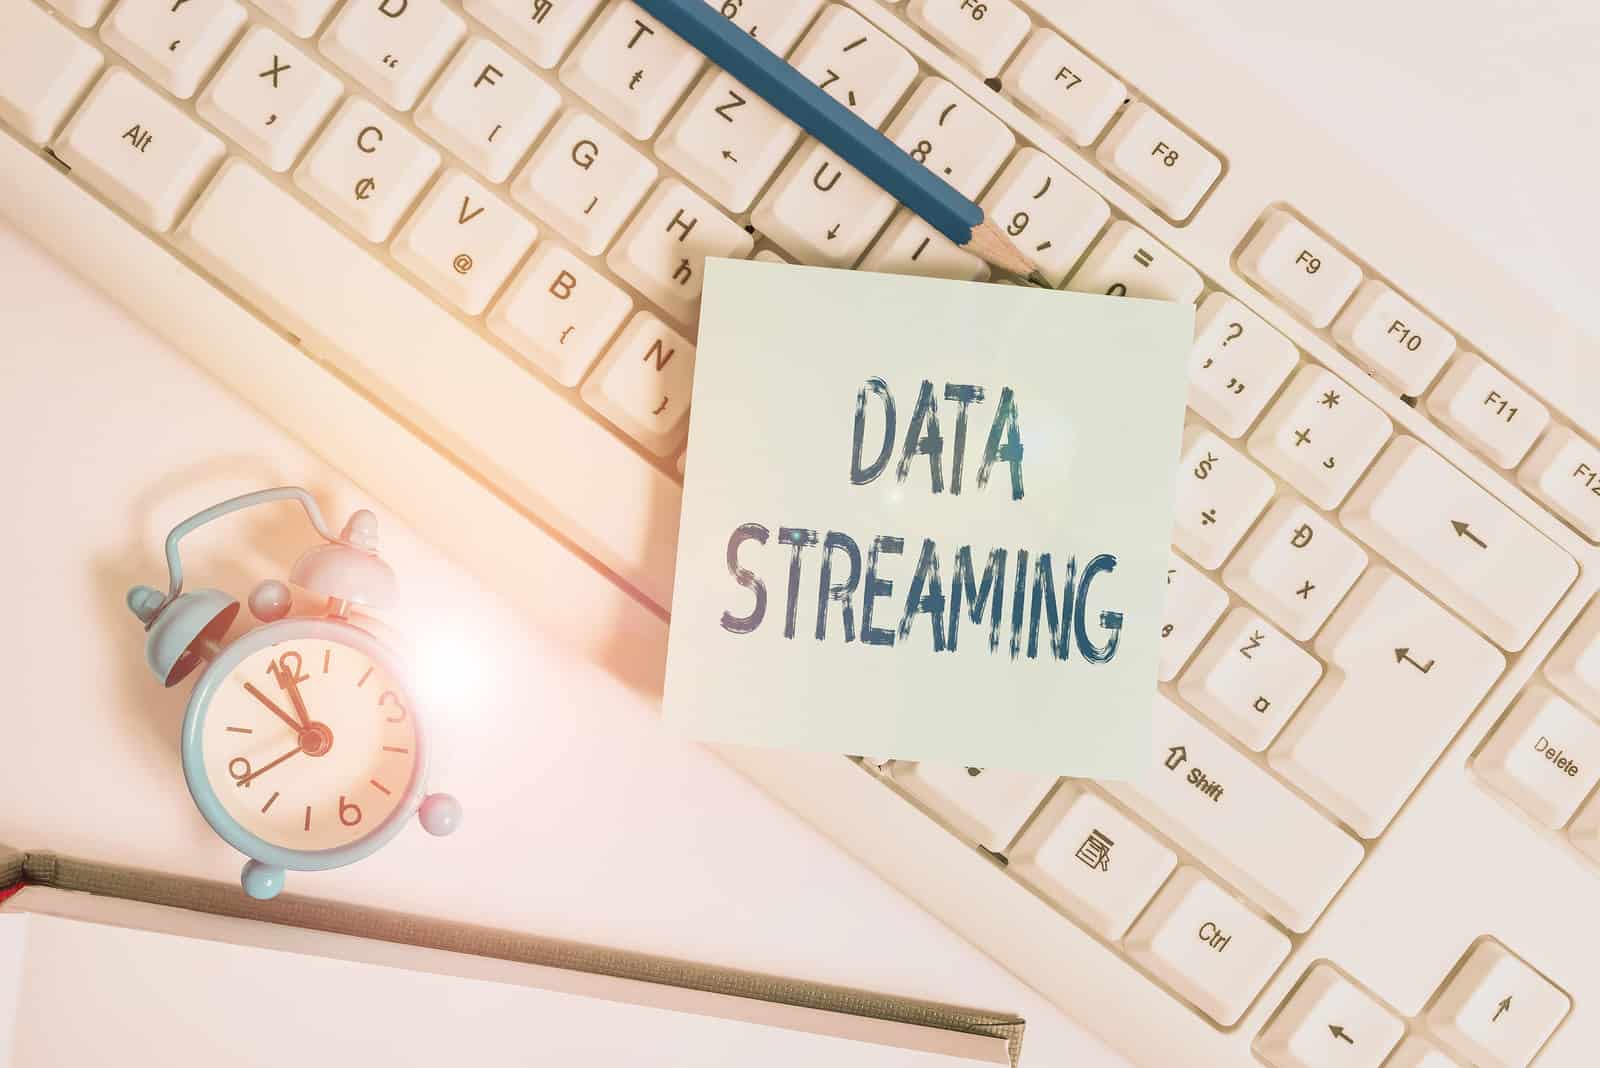 actionable insights: data streaming